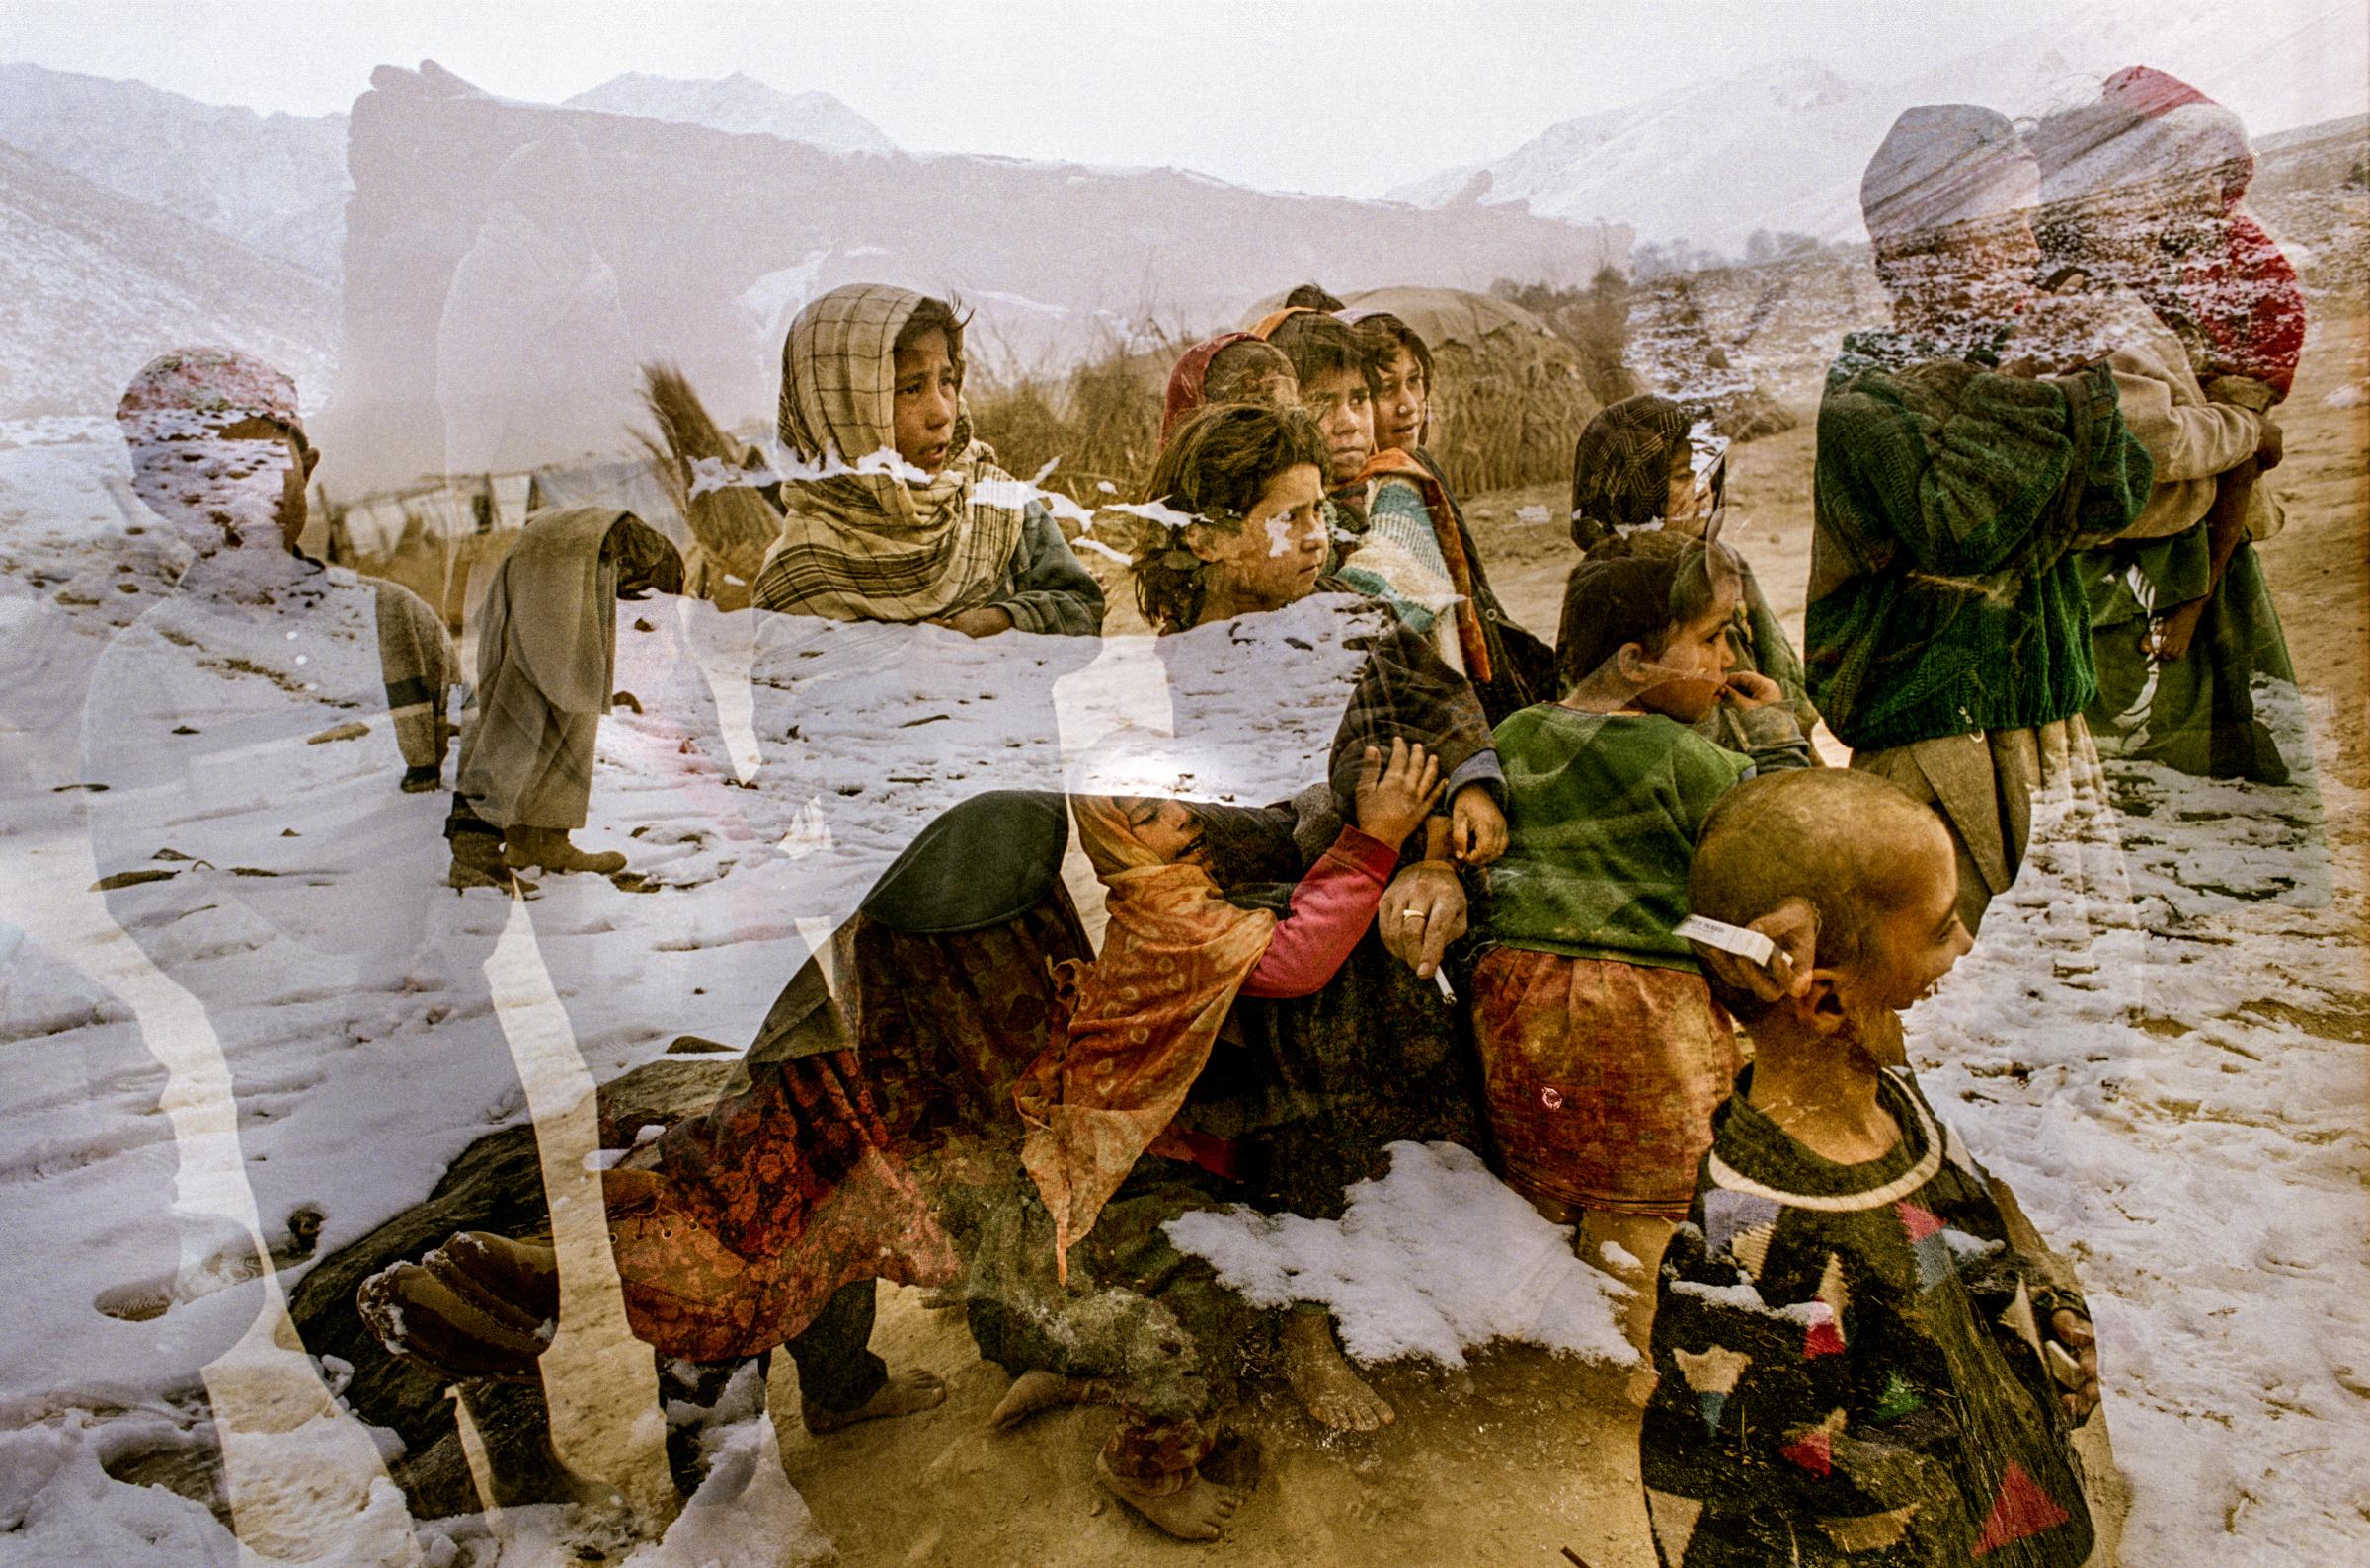 Accidental Exposures - Children in Afghanistan. According to the United Nations,...